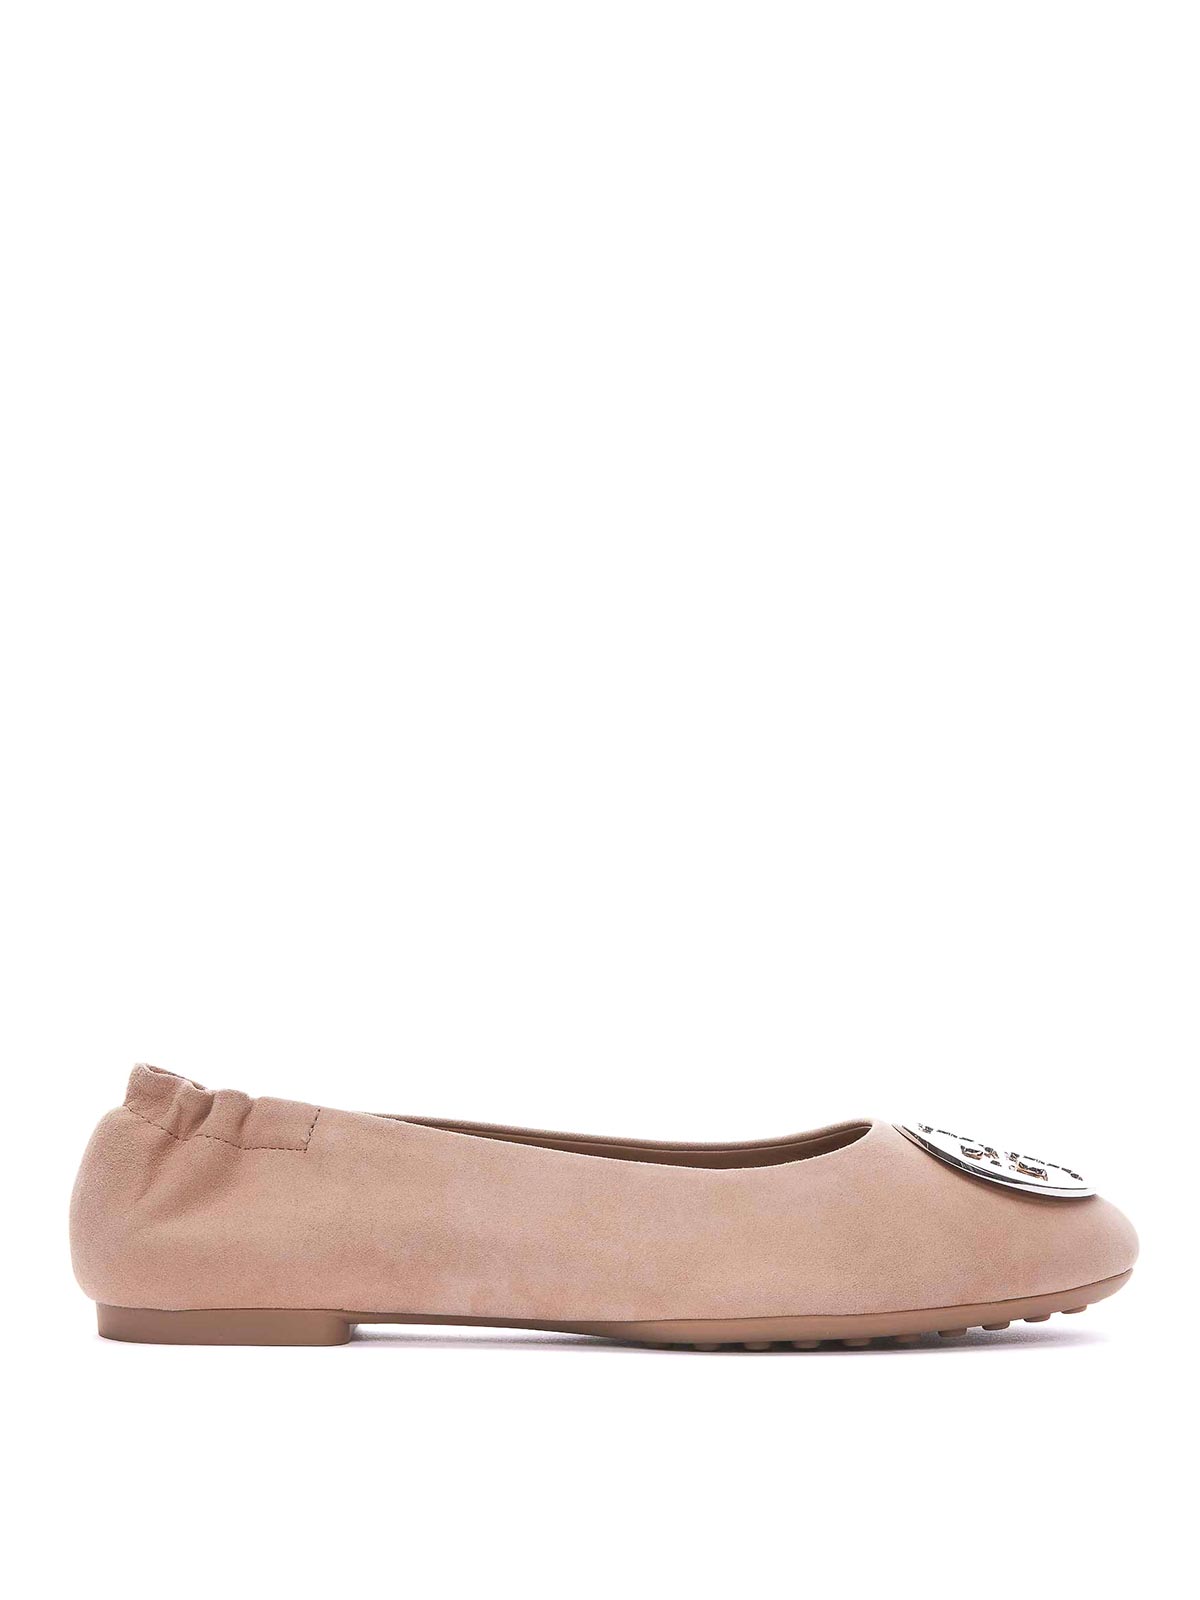 TORY BURCH CLAIRE BALLETS